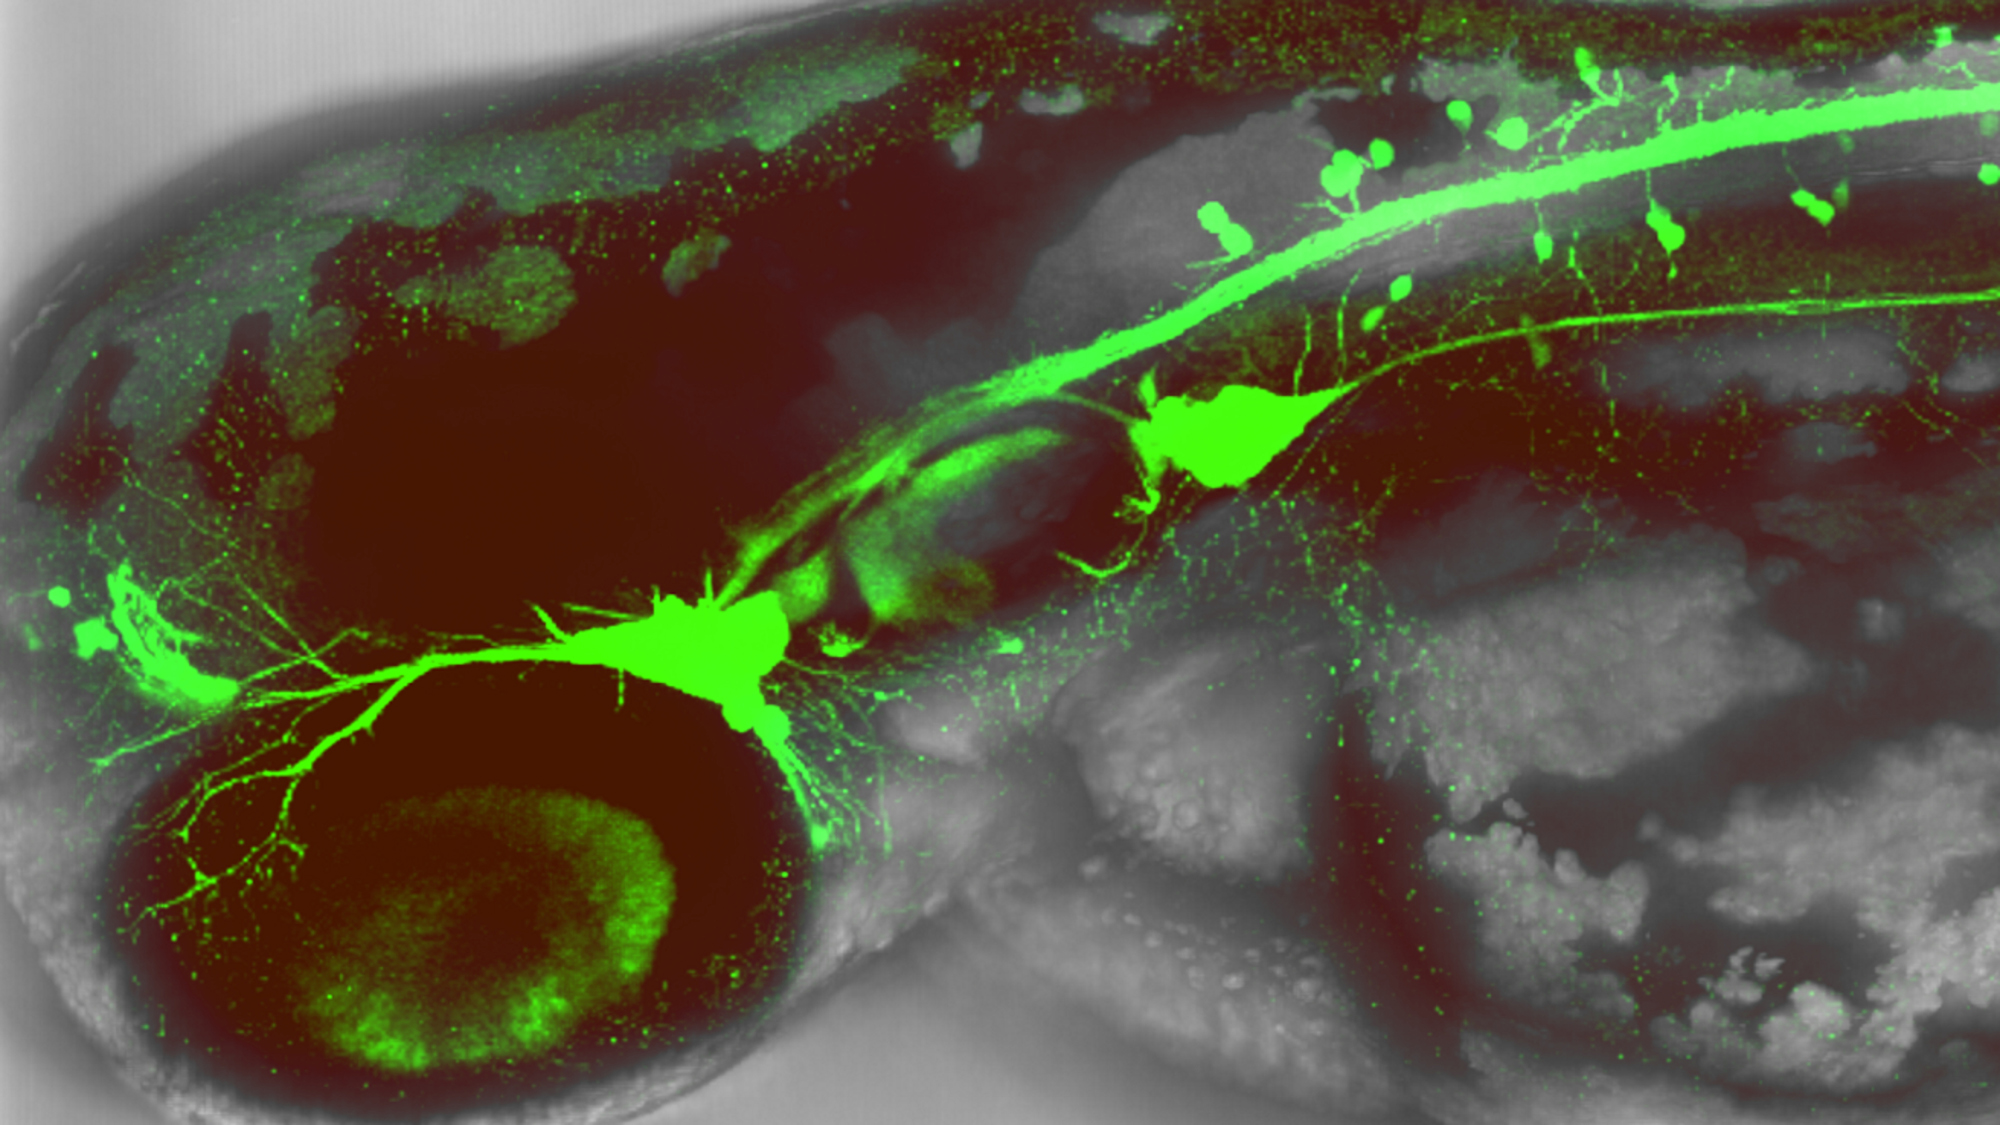 The scientists used the zebrafish embryo with fluorescent sensory neurons. Image by Berta Alsina.